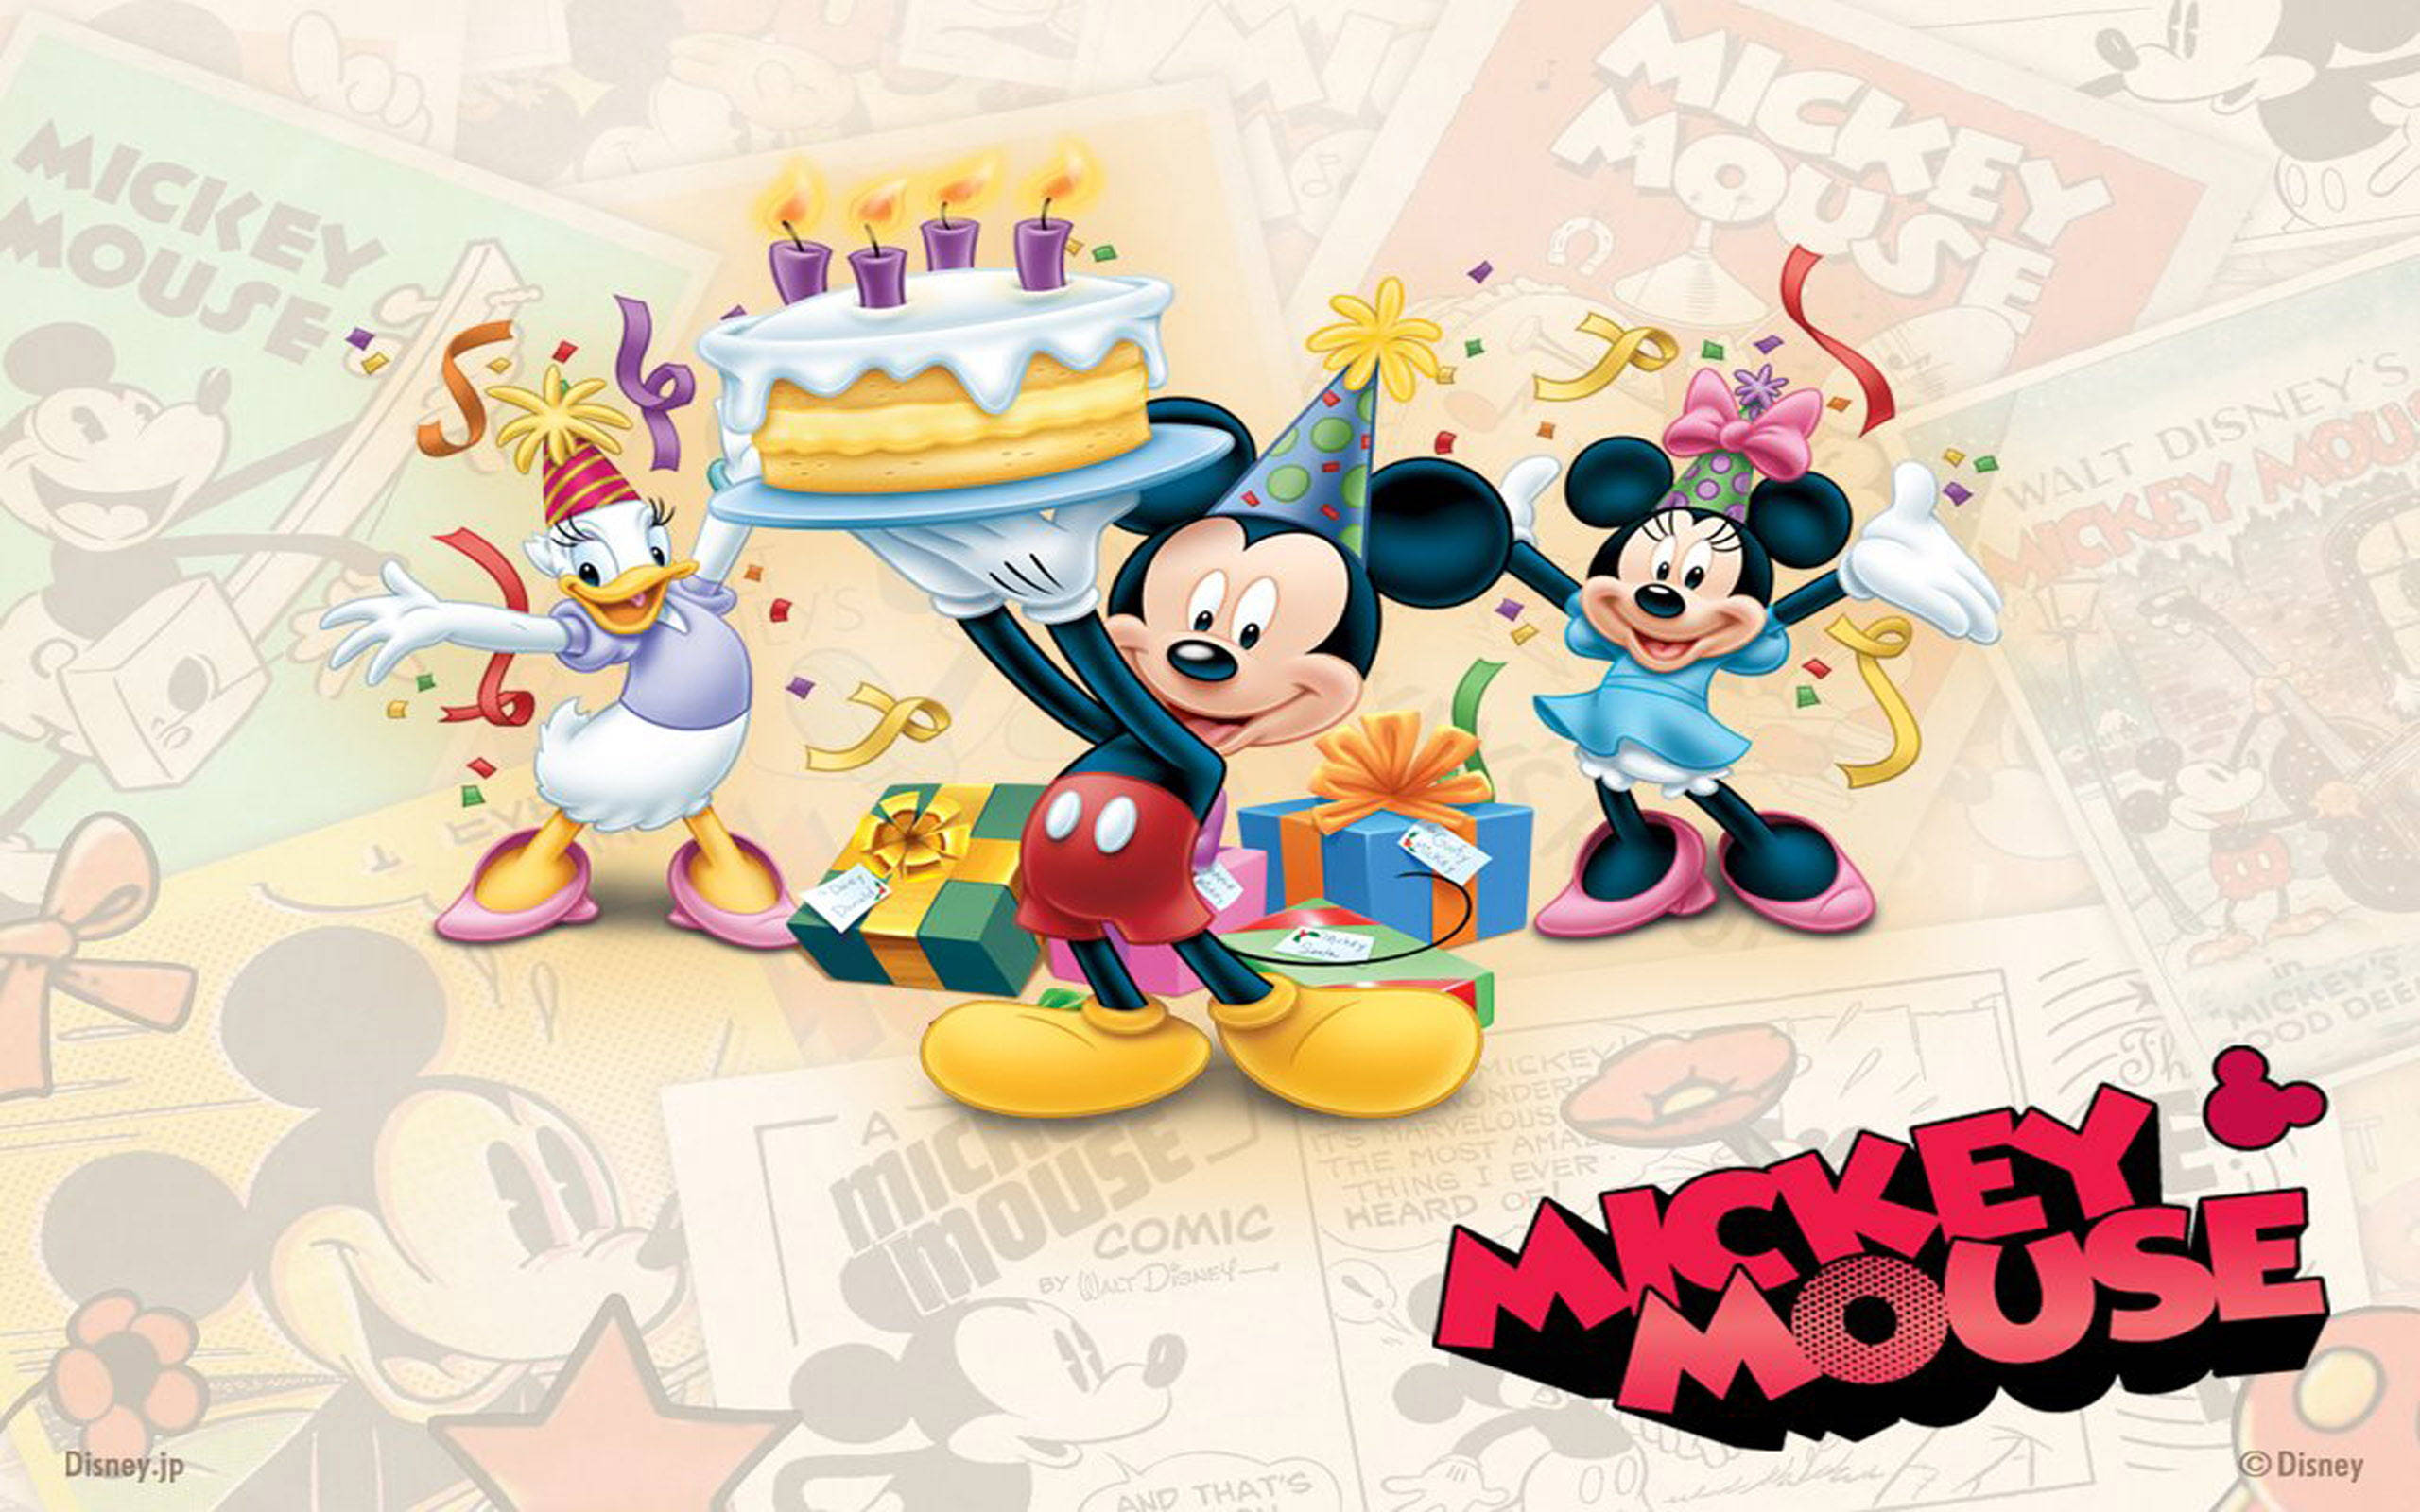 Celebrate With Style - Delicious Mickey Mouse Themed Birthday Cake Background